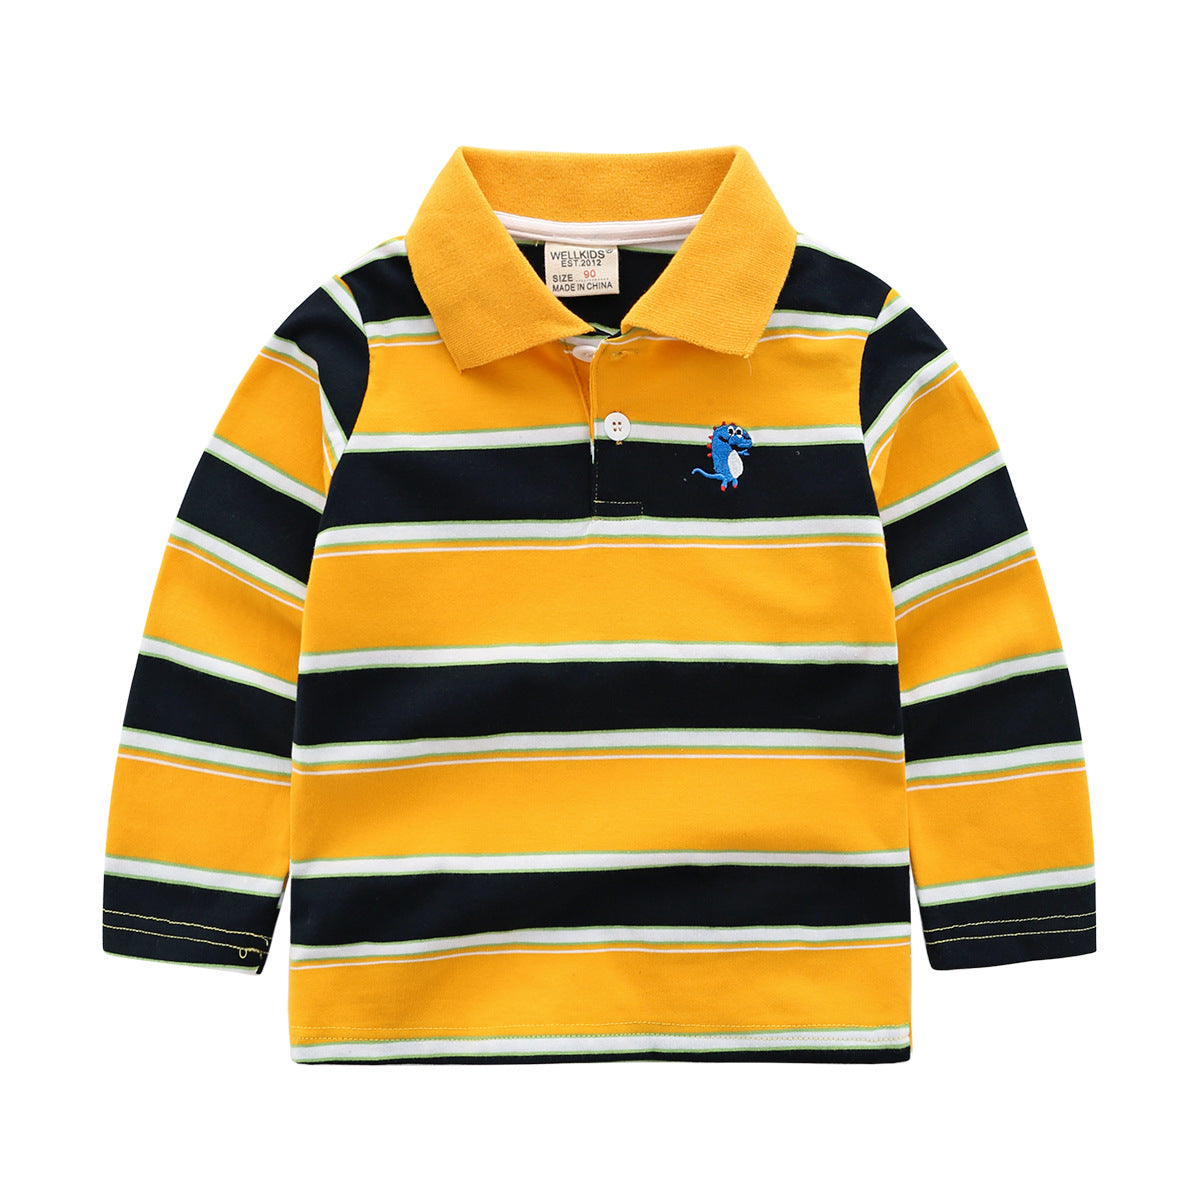 Boys Casual Striped Long Sleeve T-Shirt - Made in China - Soft Cotton Fabric - Non-Hooded - Ages 3-8 Years - Lapel Collar - Farefe